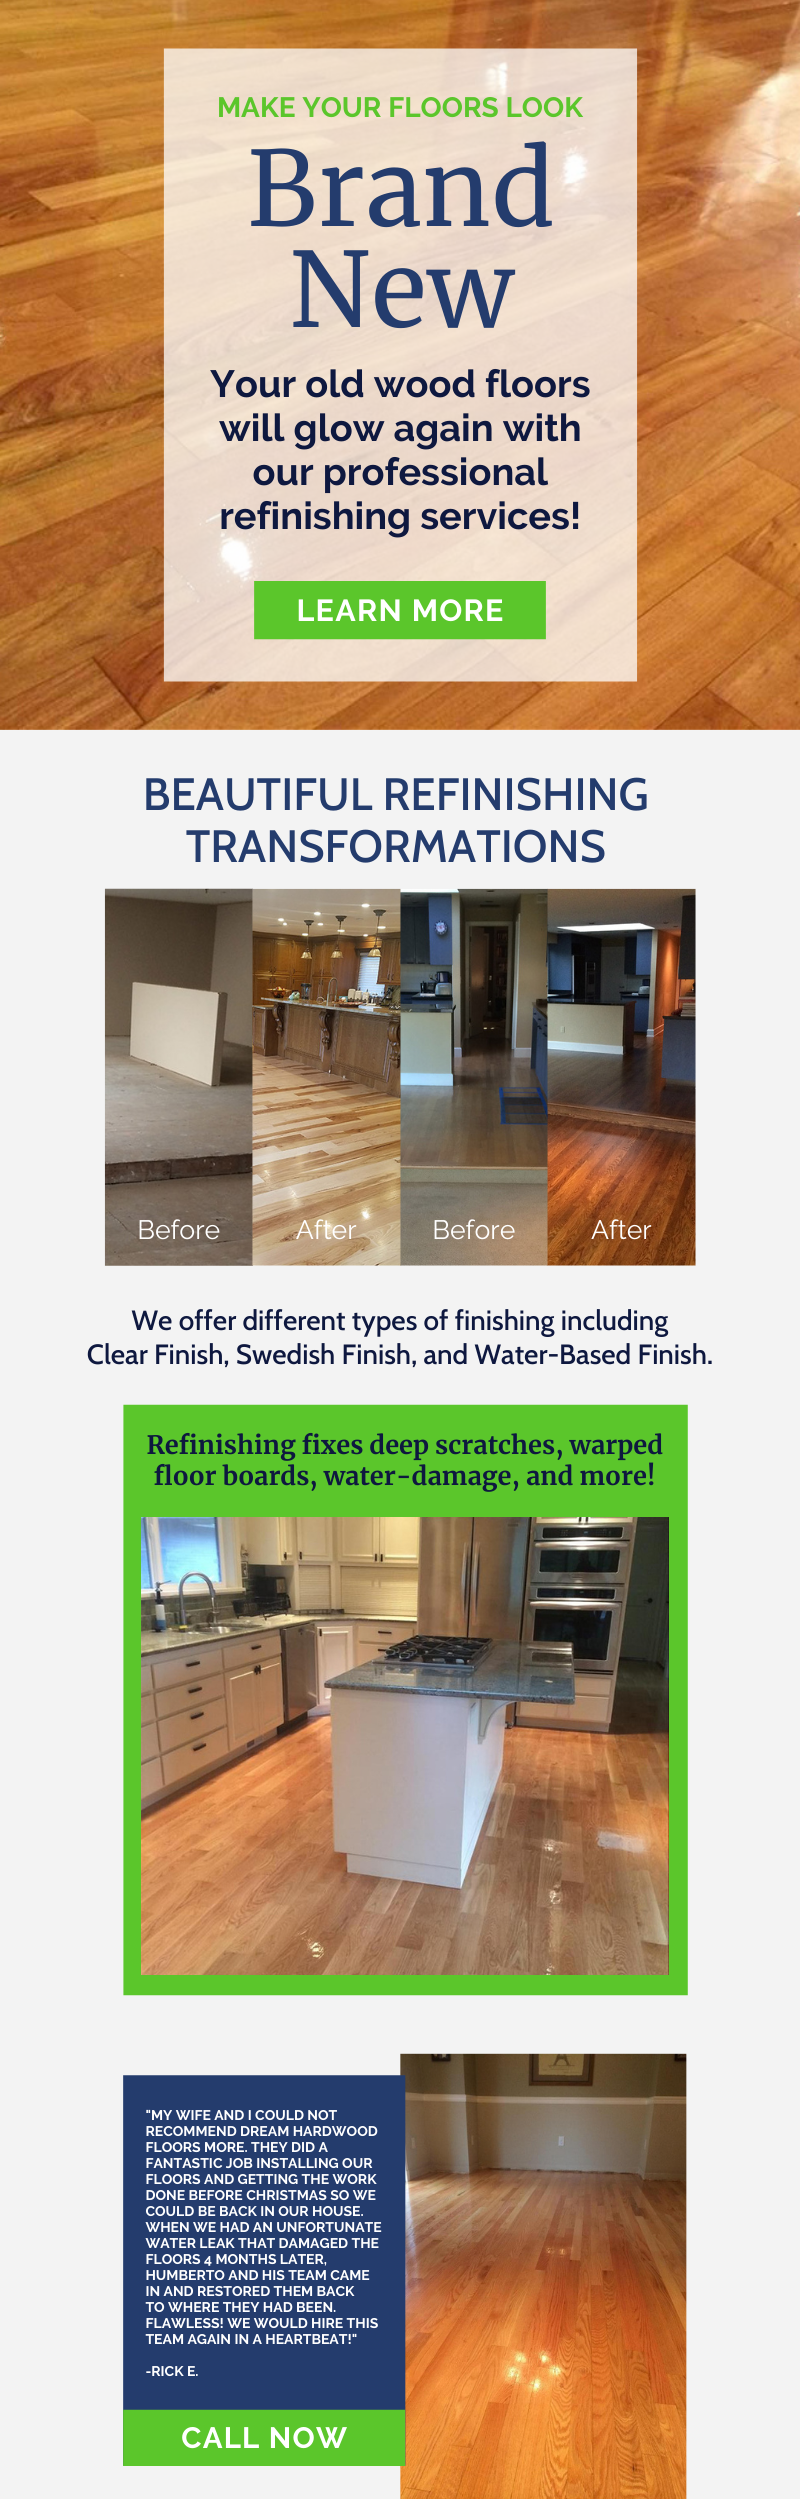 make your floors look brand new infographic